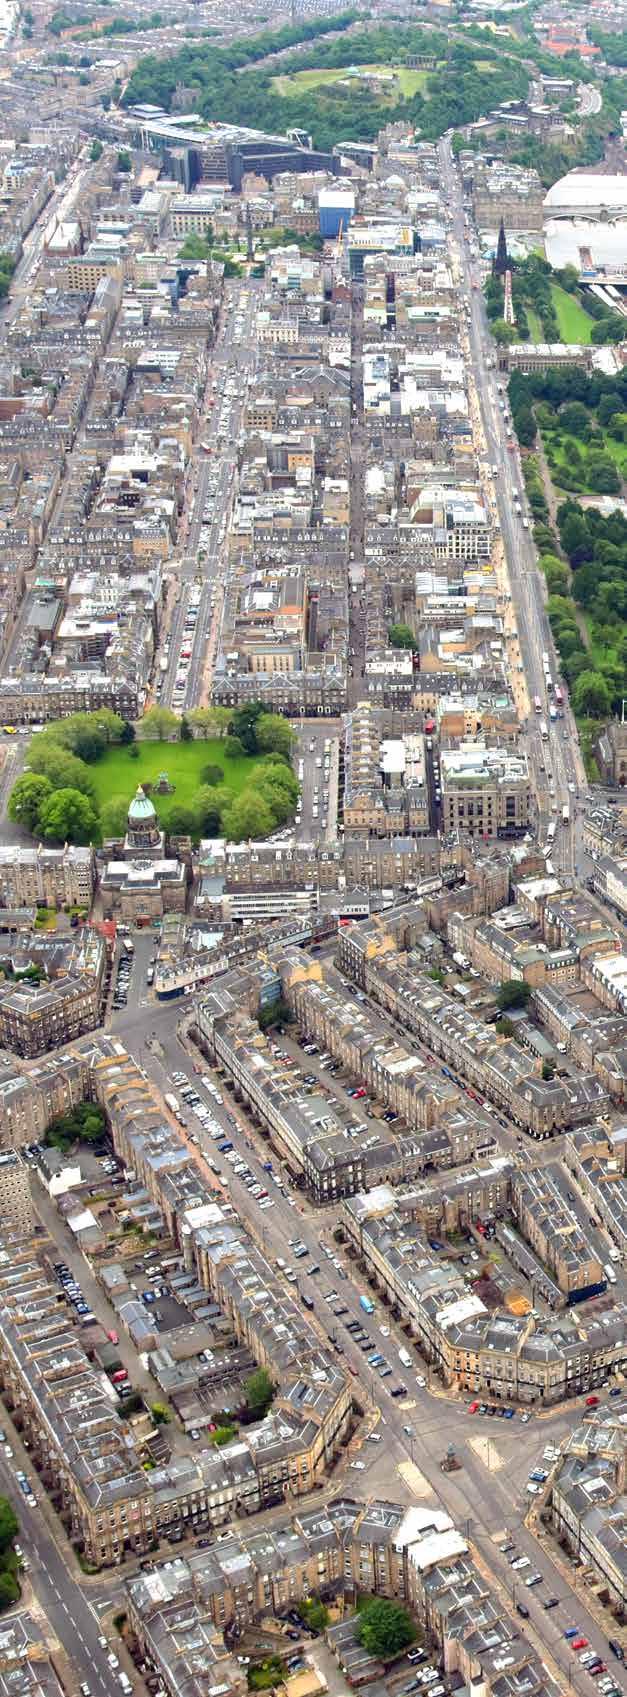 03 14-17 ATHOLL CRESCENT EDINBURGH EH3 8HA Situation Aerial View The stunning Category A listed Atholl Crescent in the West End of Edinburgh city centre The subjects are situated on the stunning